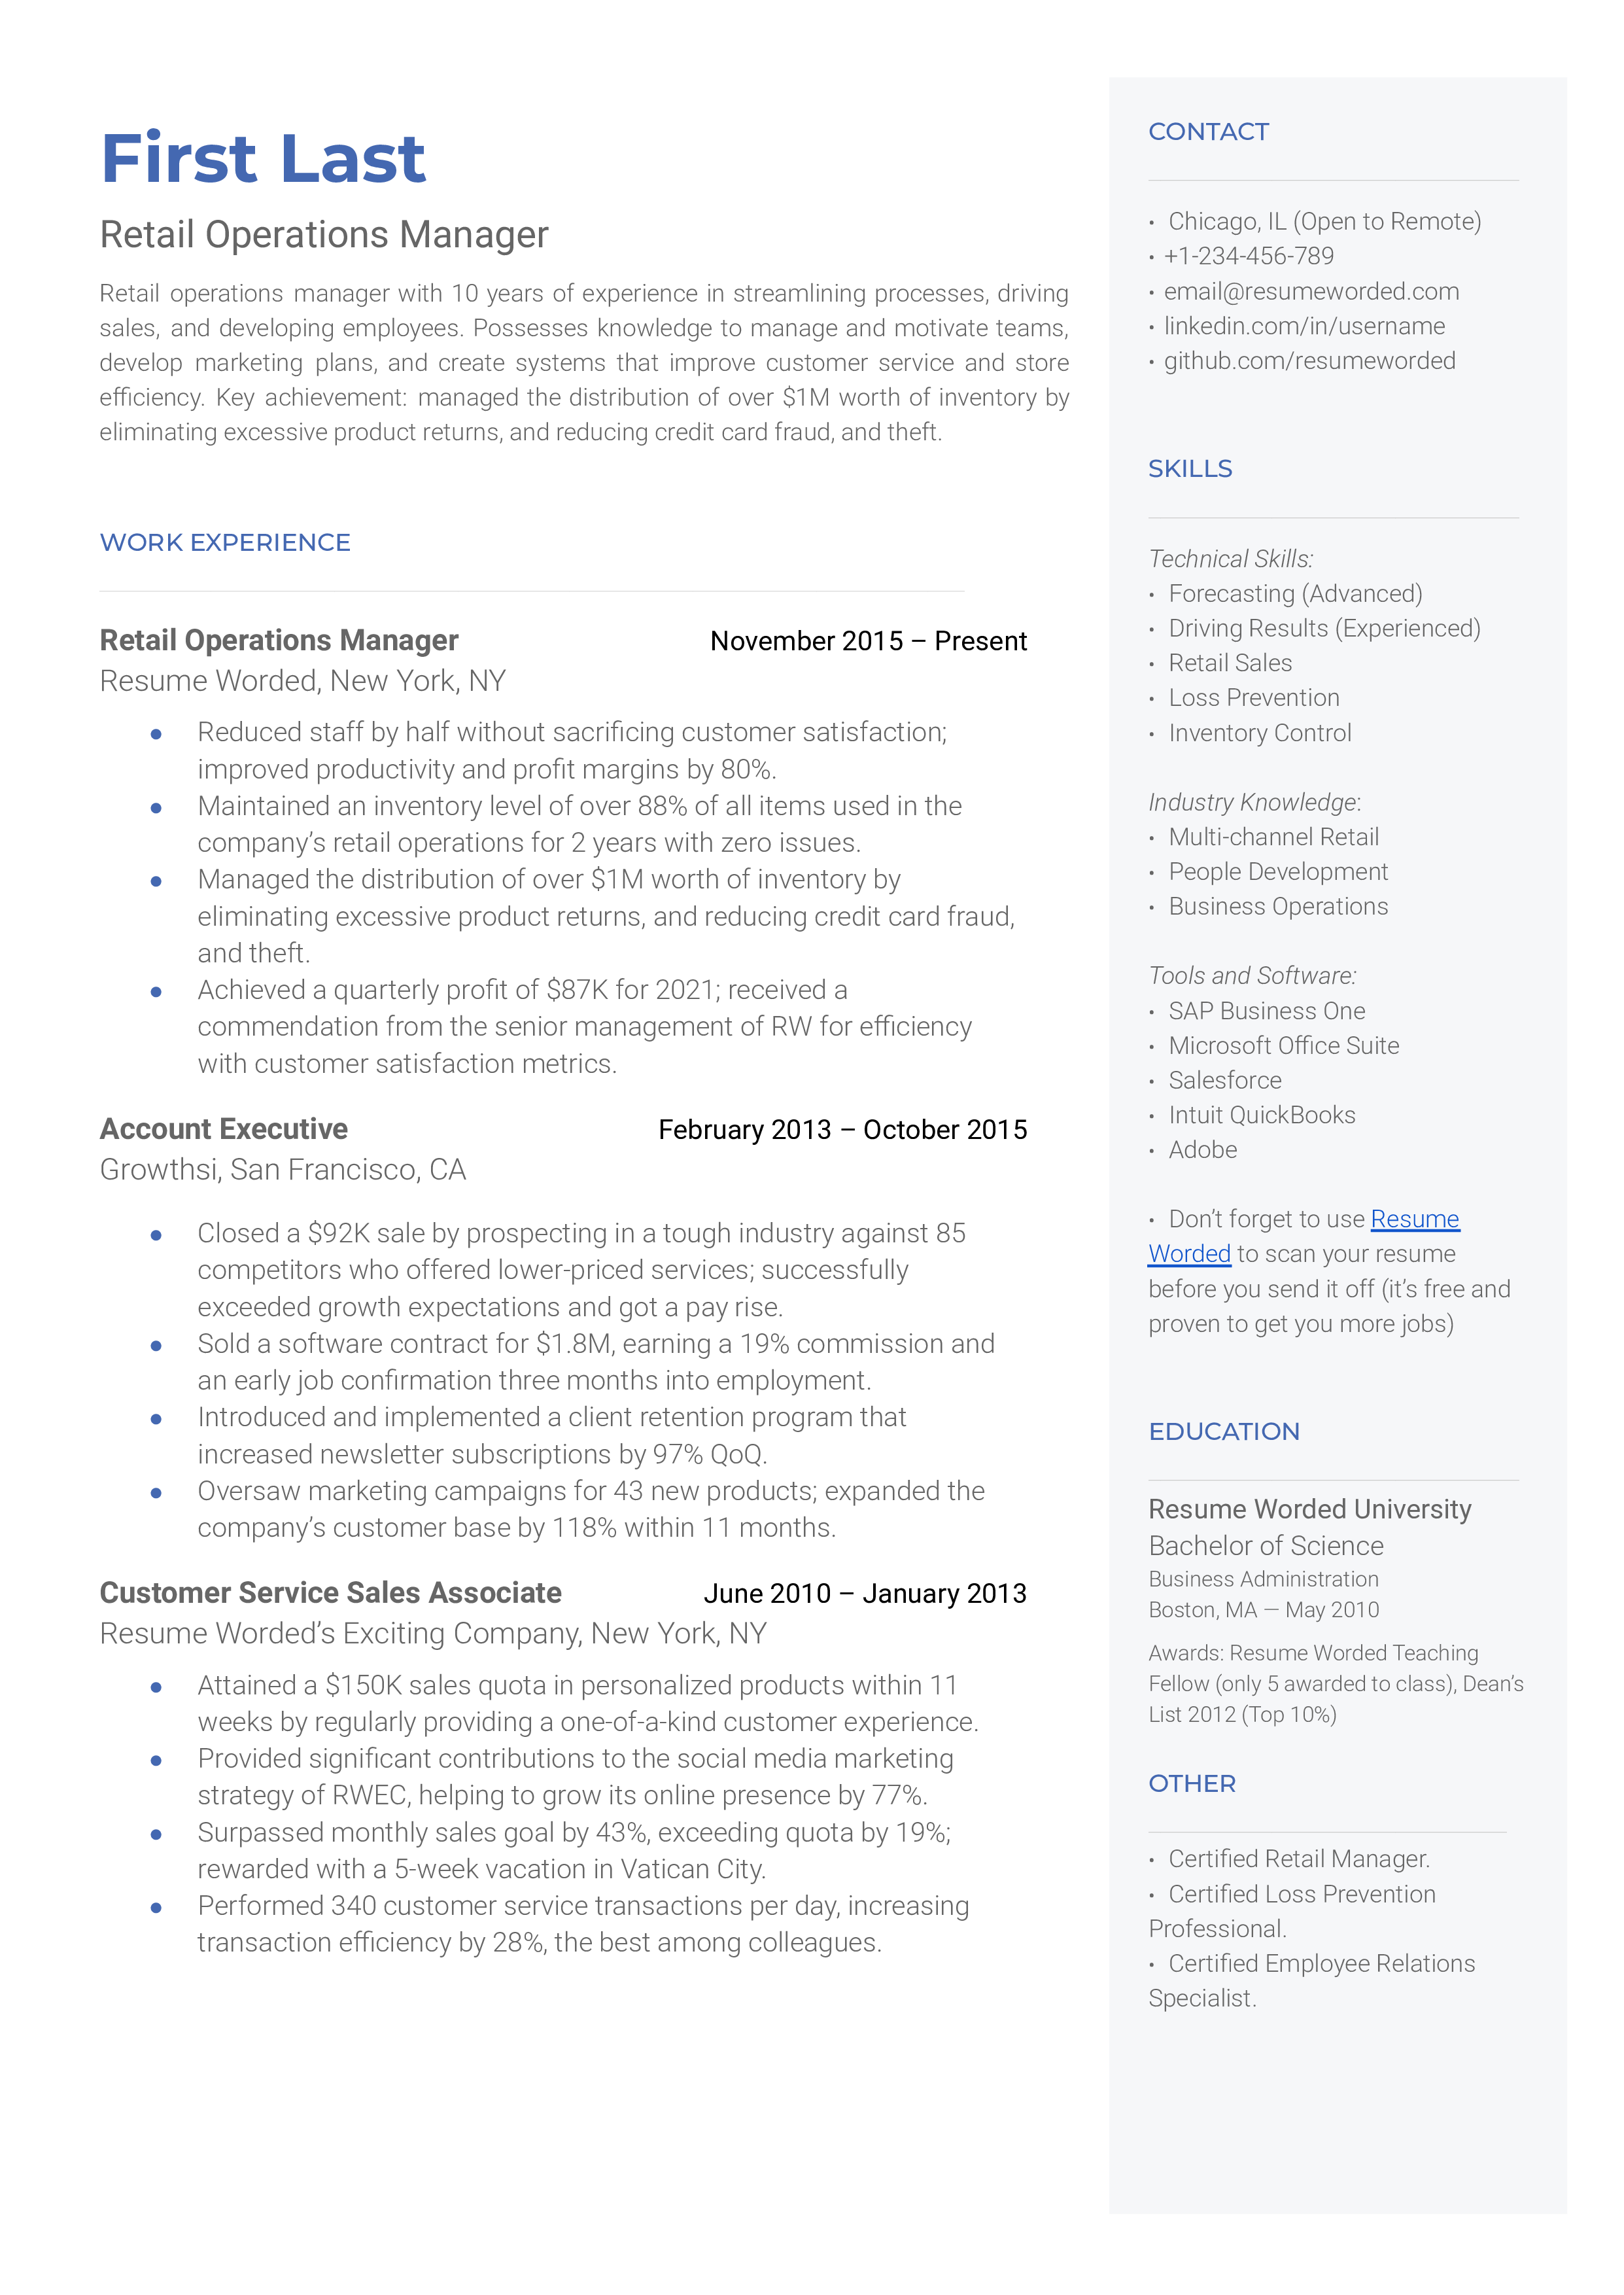 An organized and professional CV for a retail operations manager role.